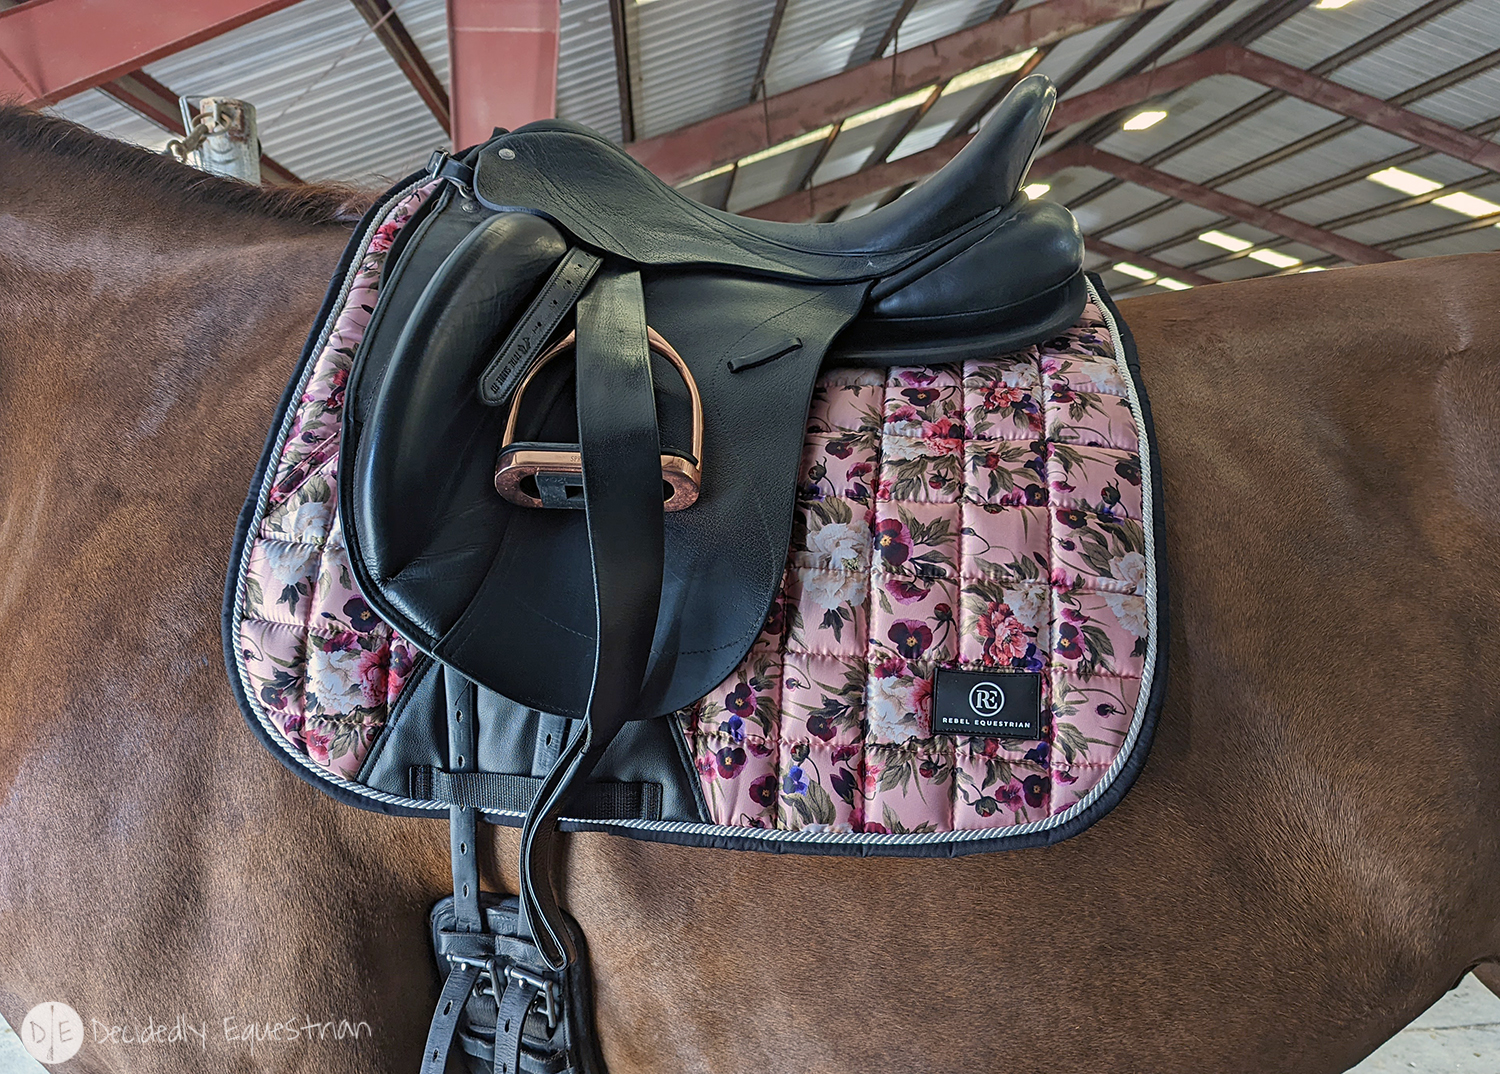 Rebel Equestrian Saddle Pads Review